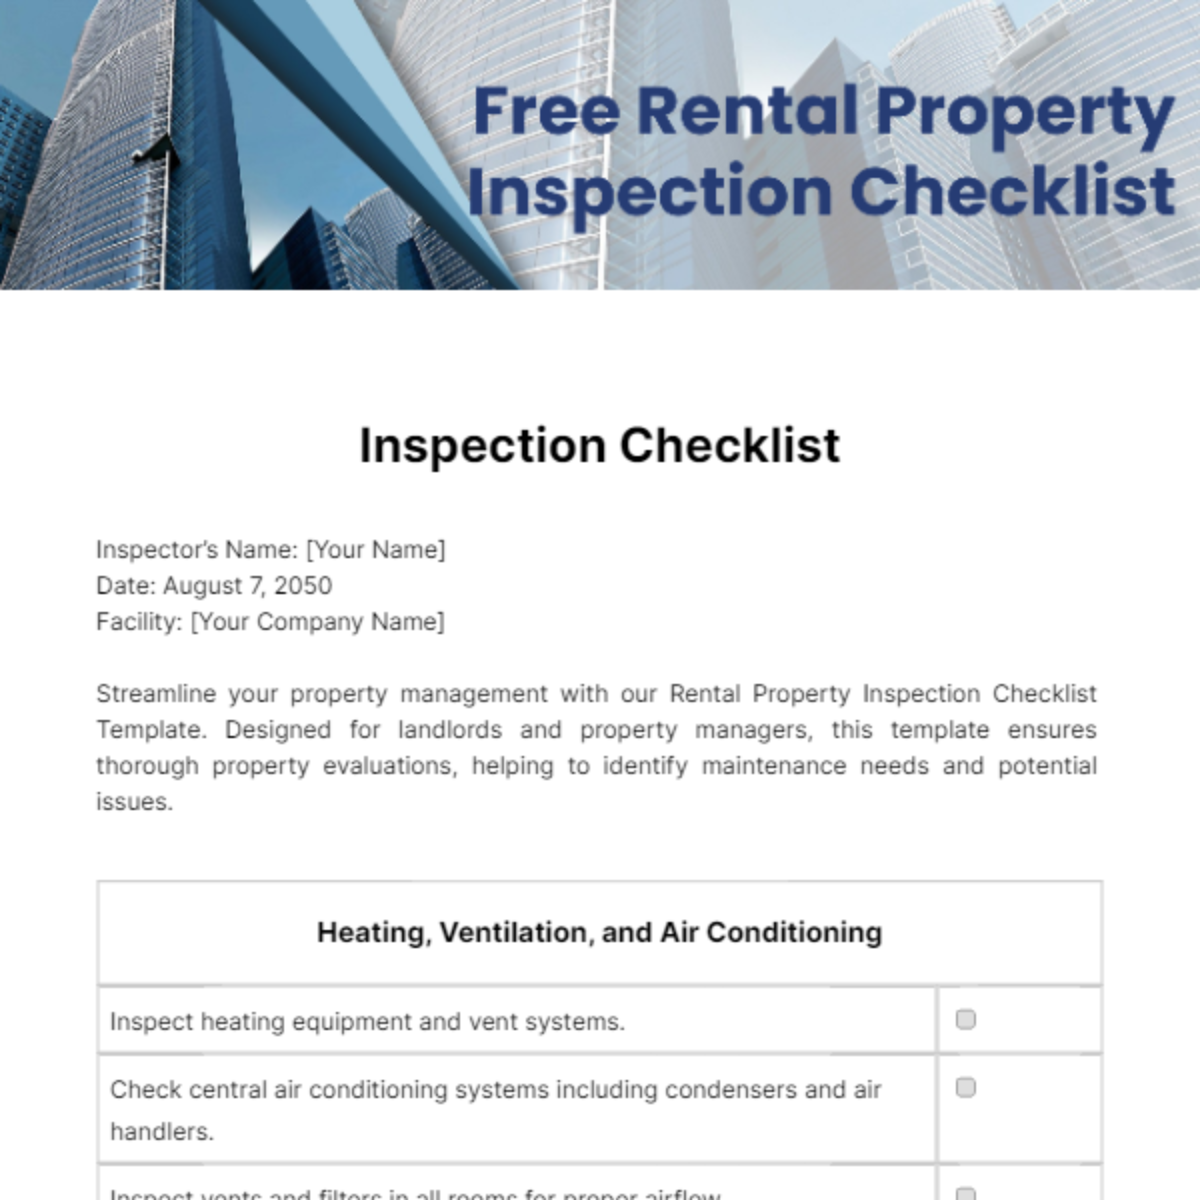 Free Rental Property Inspection Checklist Template